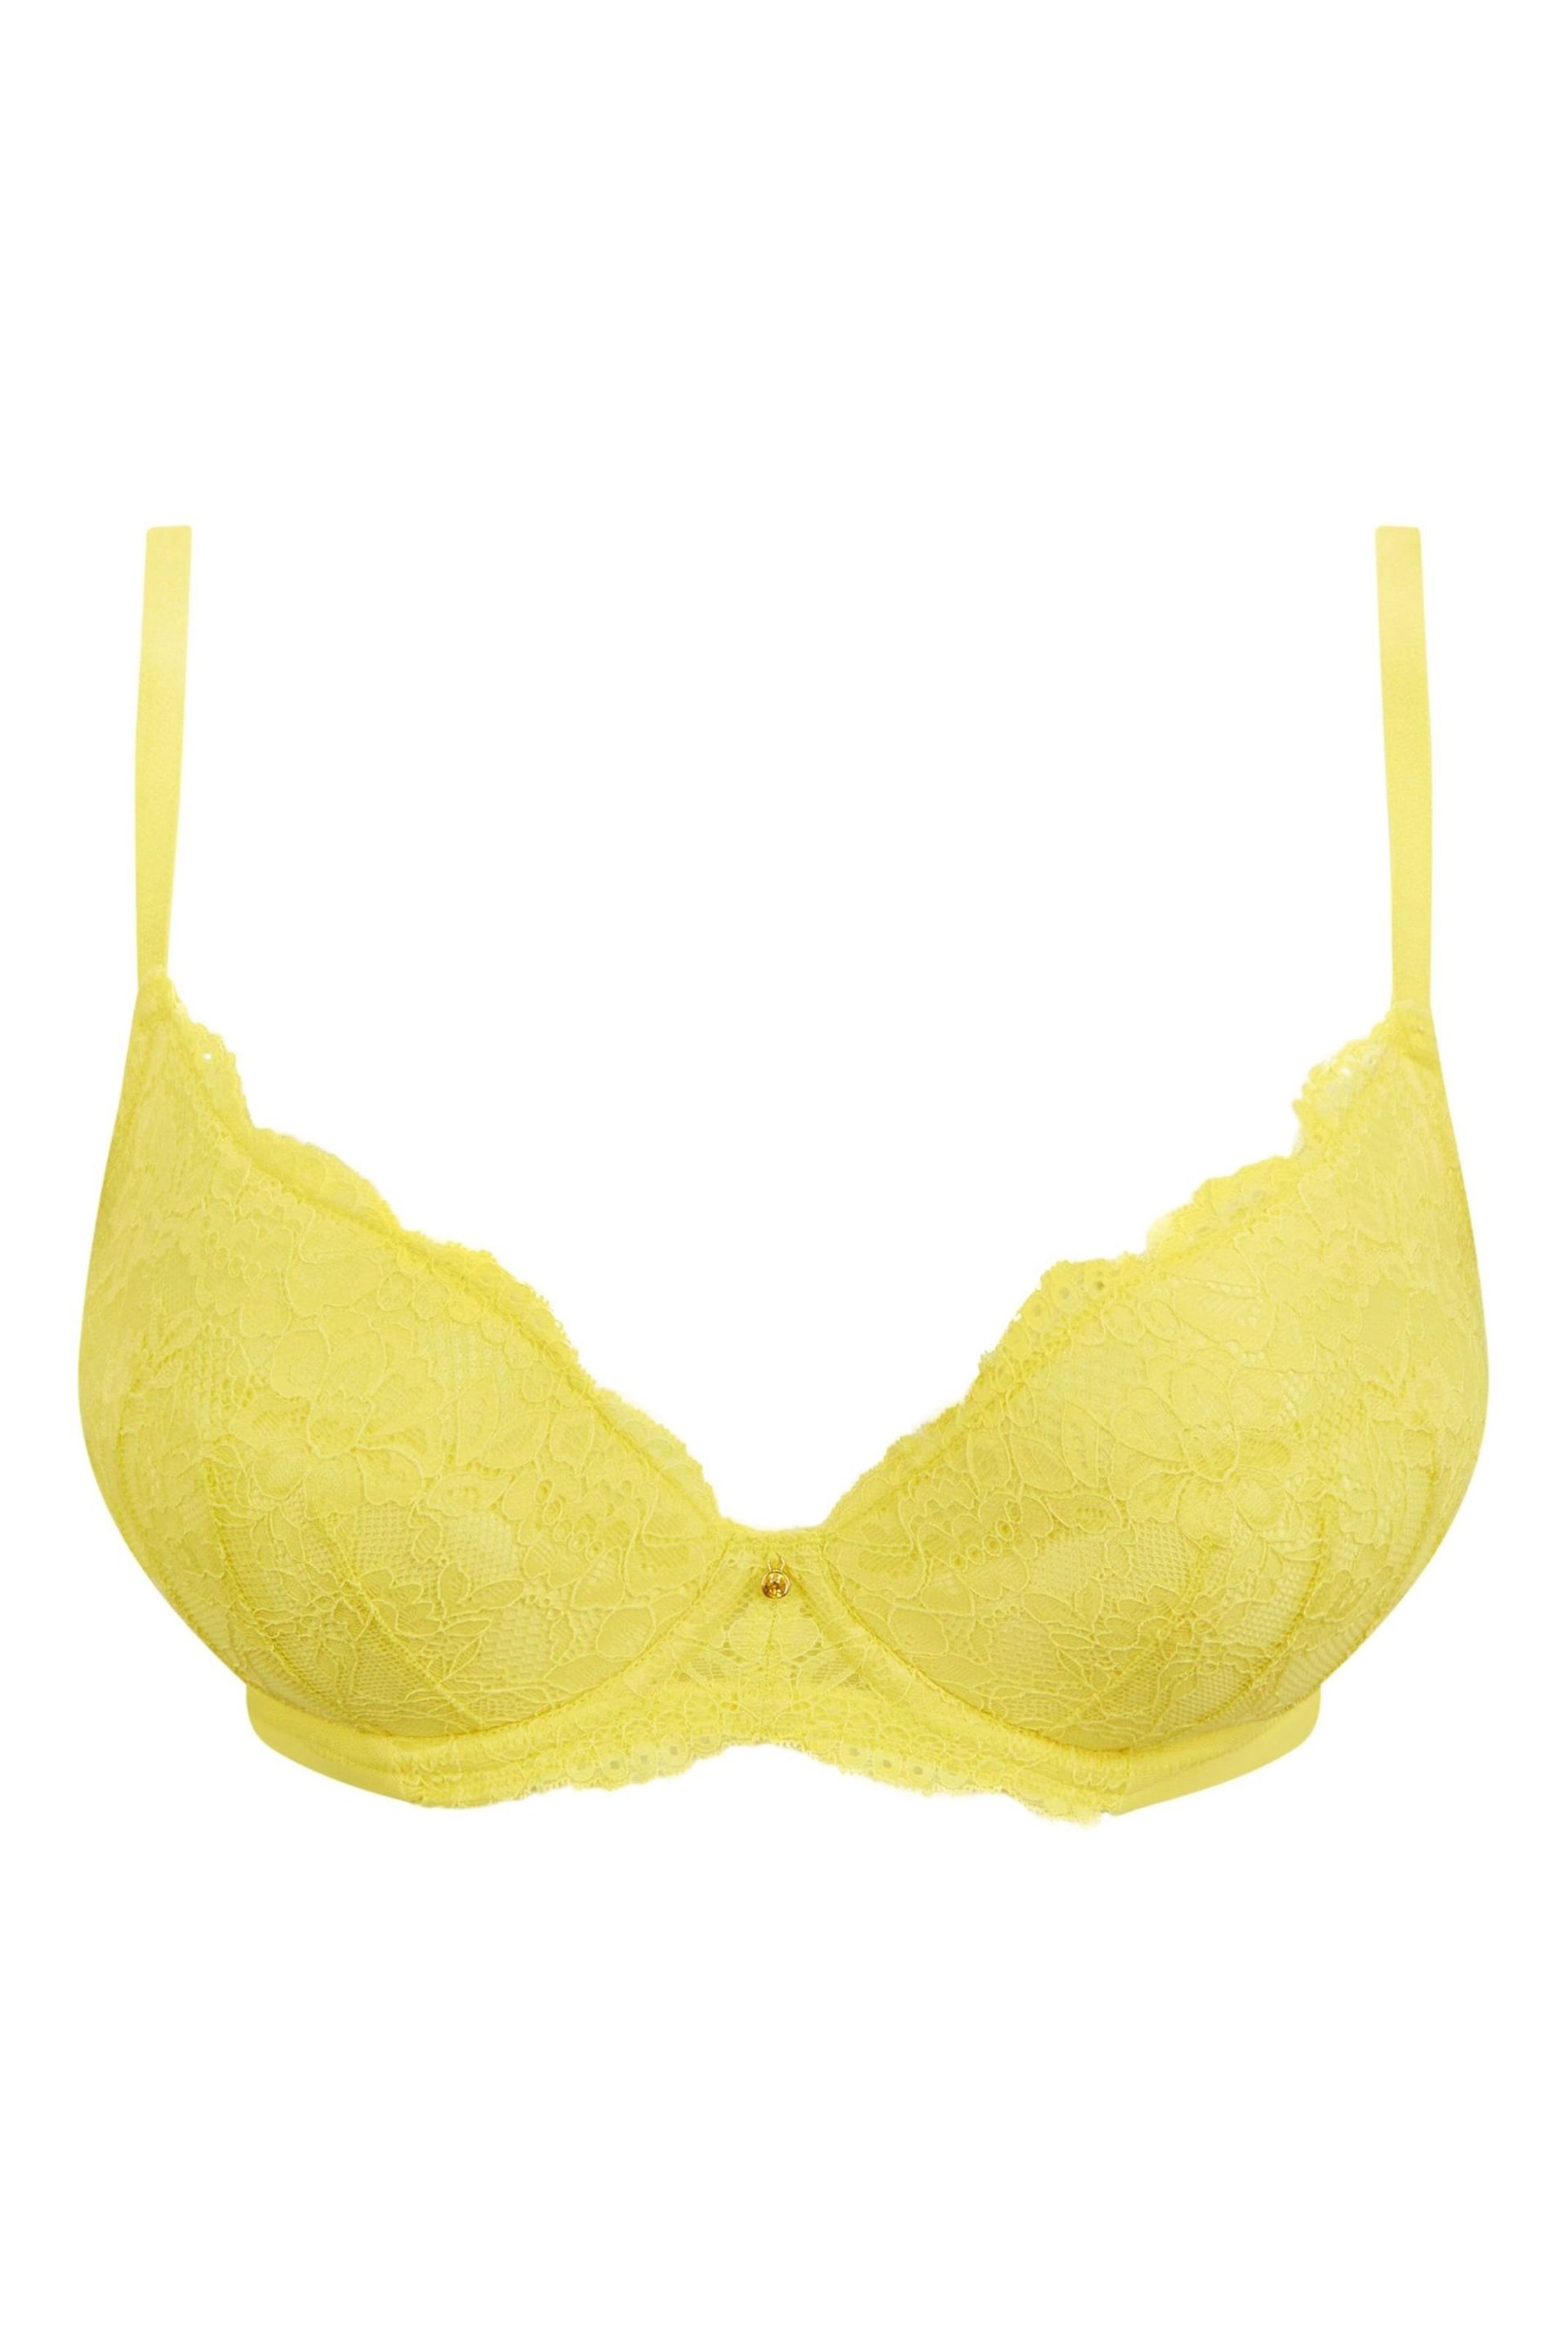 Ann Summers Yellow Sexy Lace Planet Padded Plunge Bra - Image 5 of 5